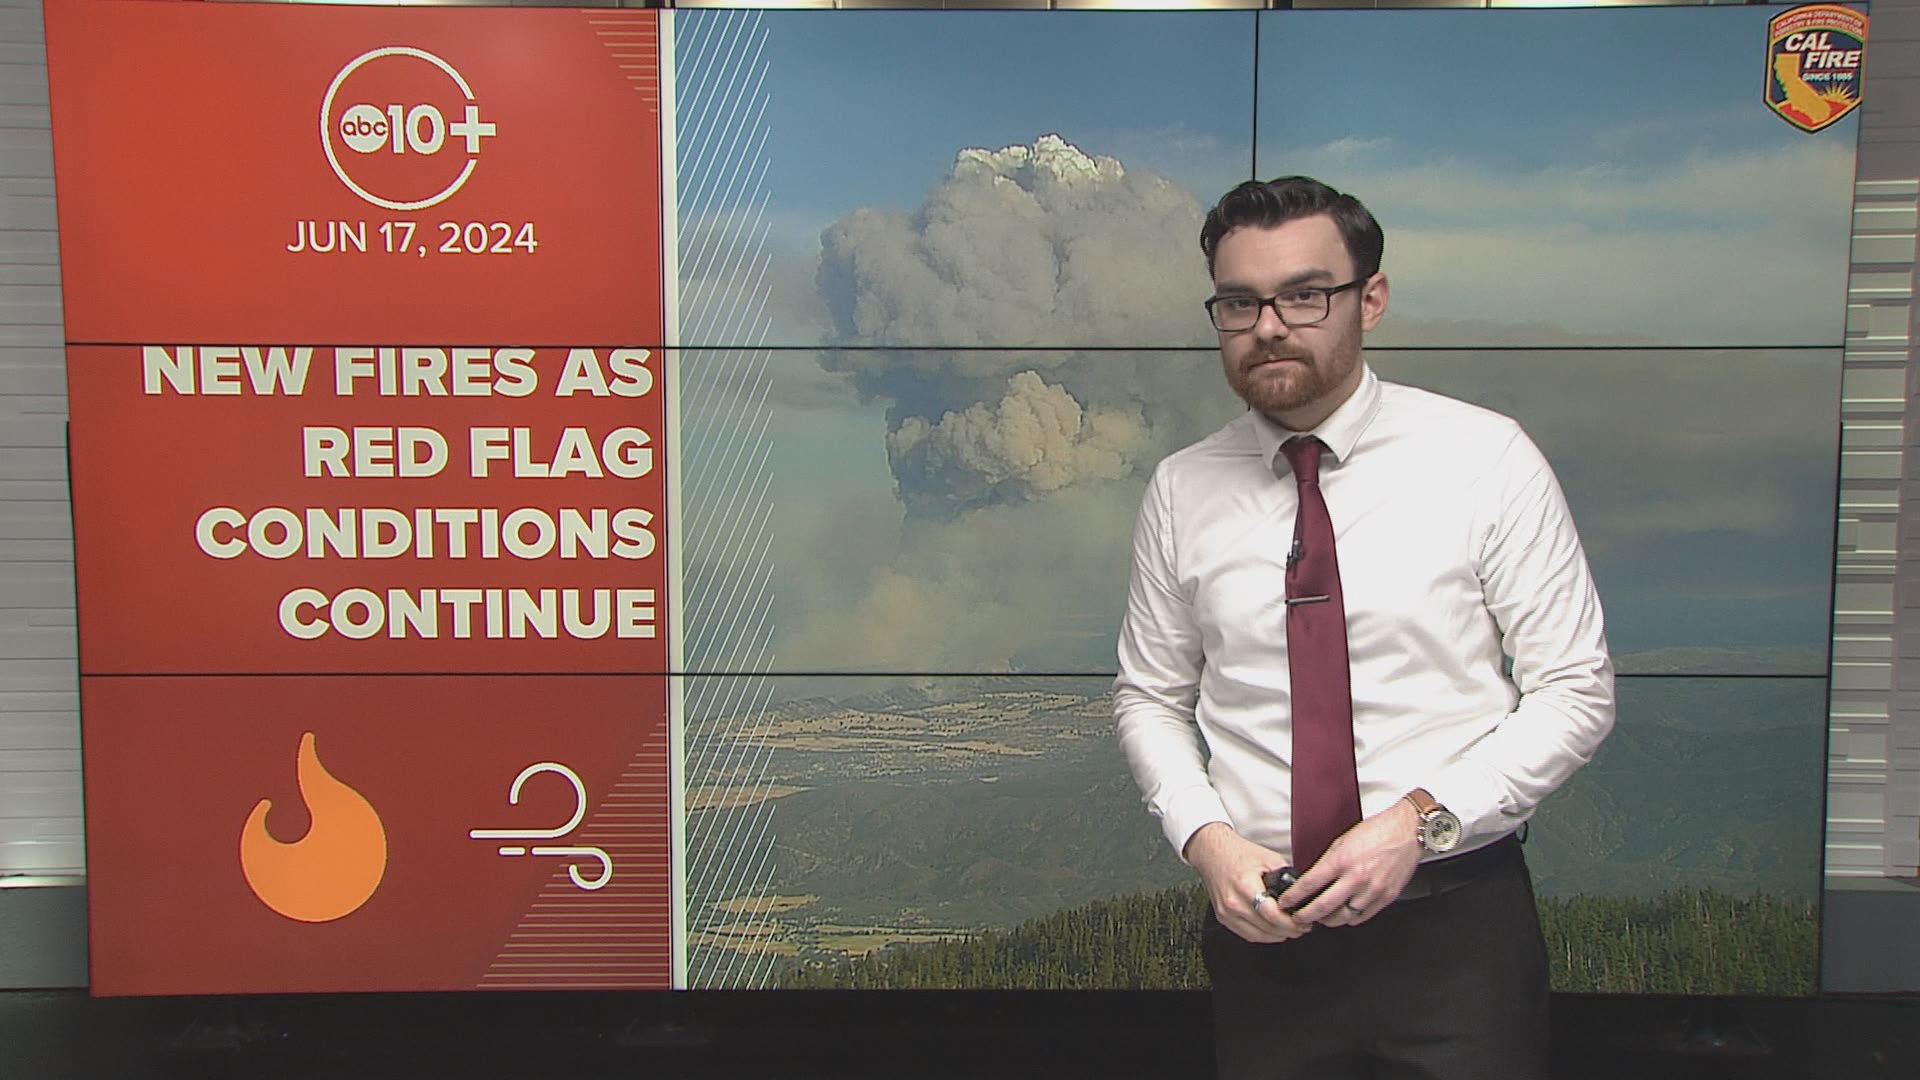 Red Flag Warning continues across the Central Valley with numerous new fires in Northern California alone. ABC10 meteorologist Brenden Mincheff has the forecast.